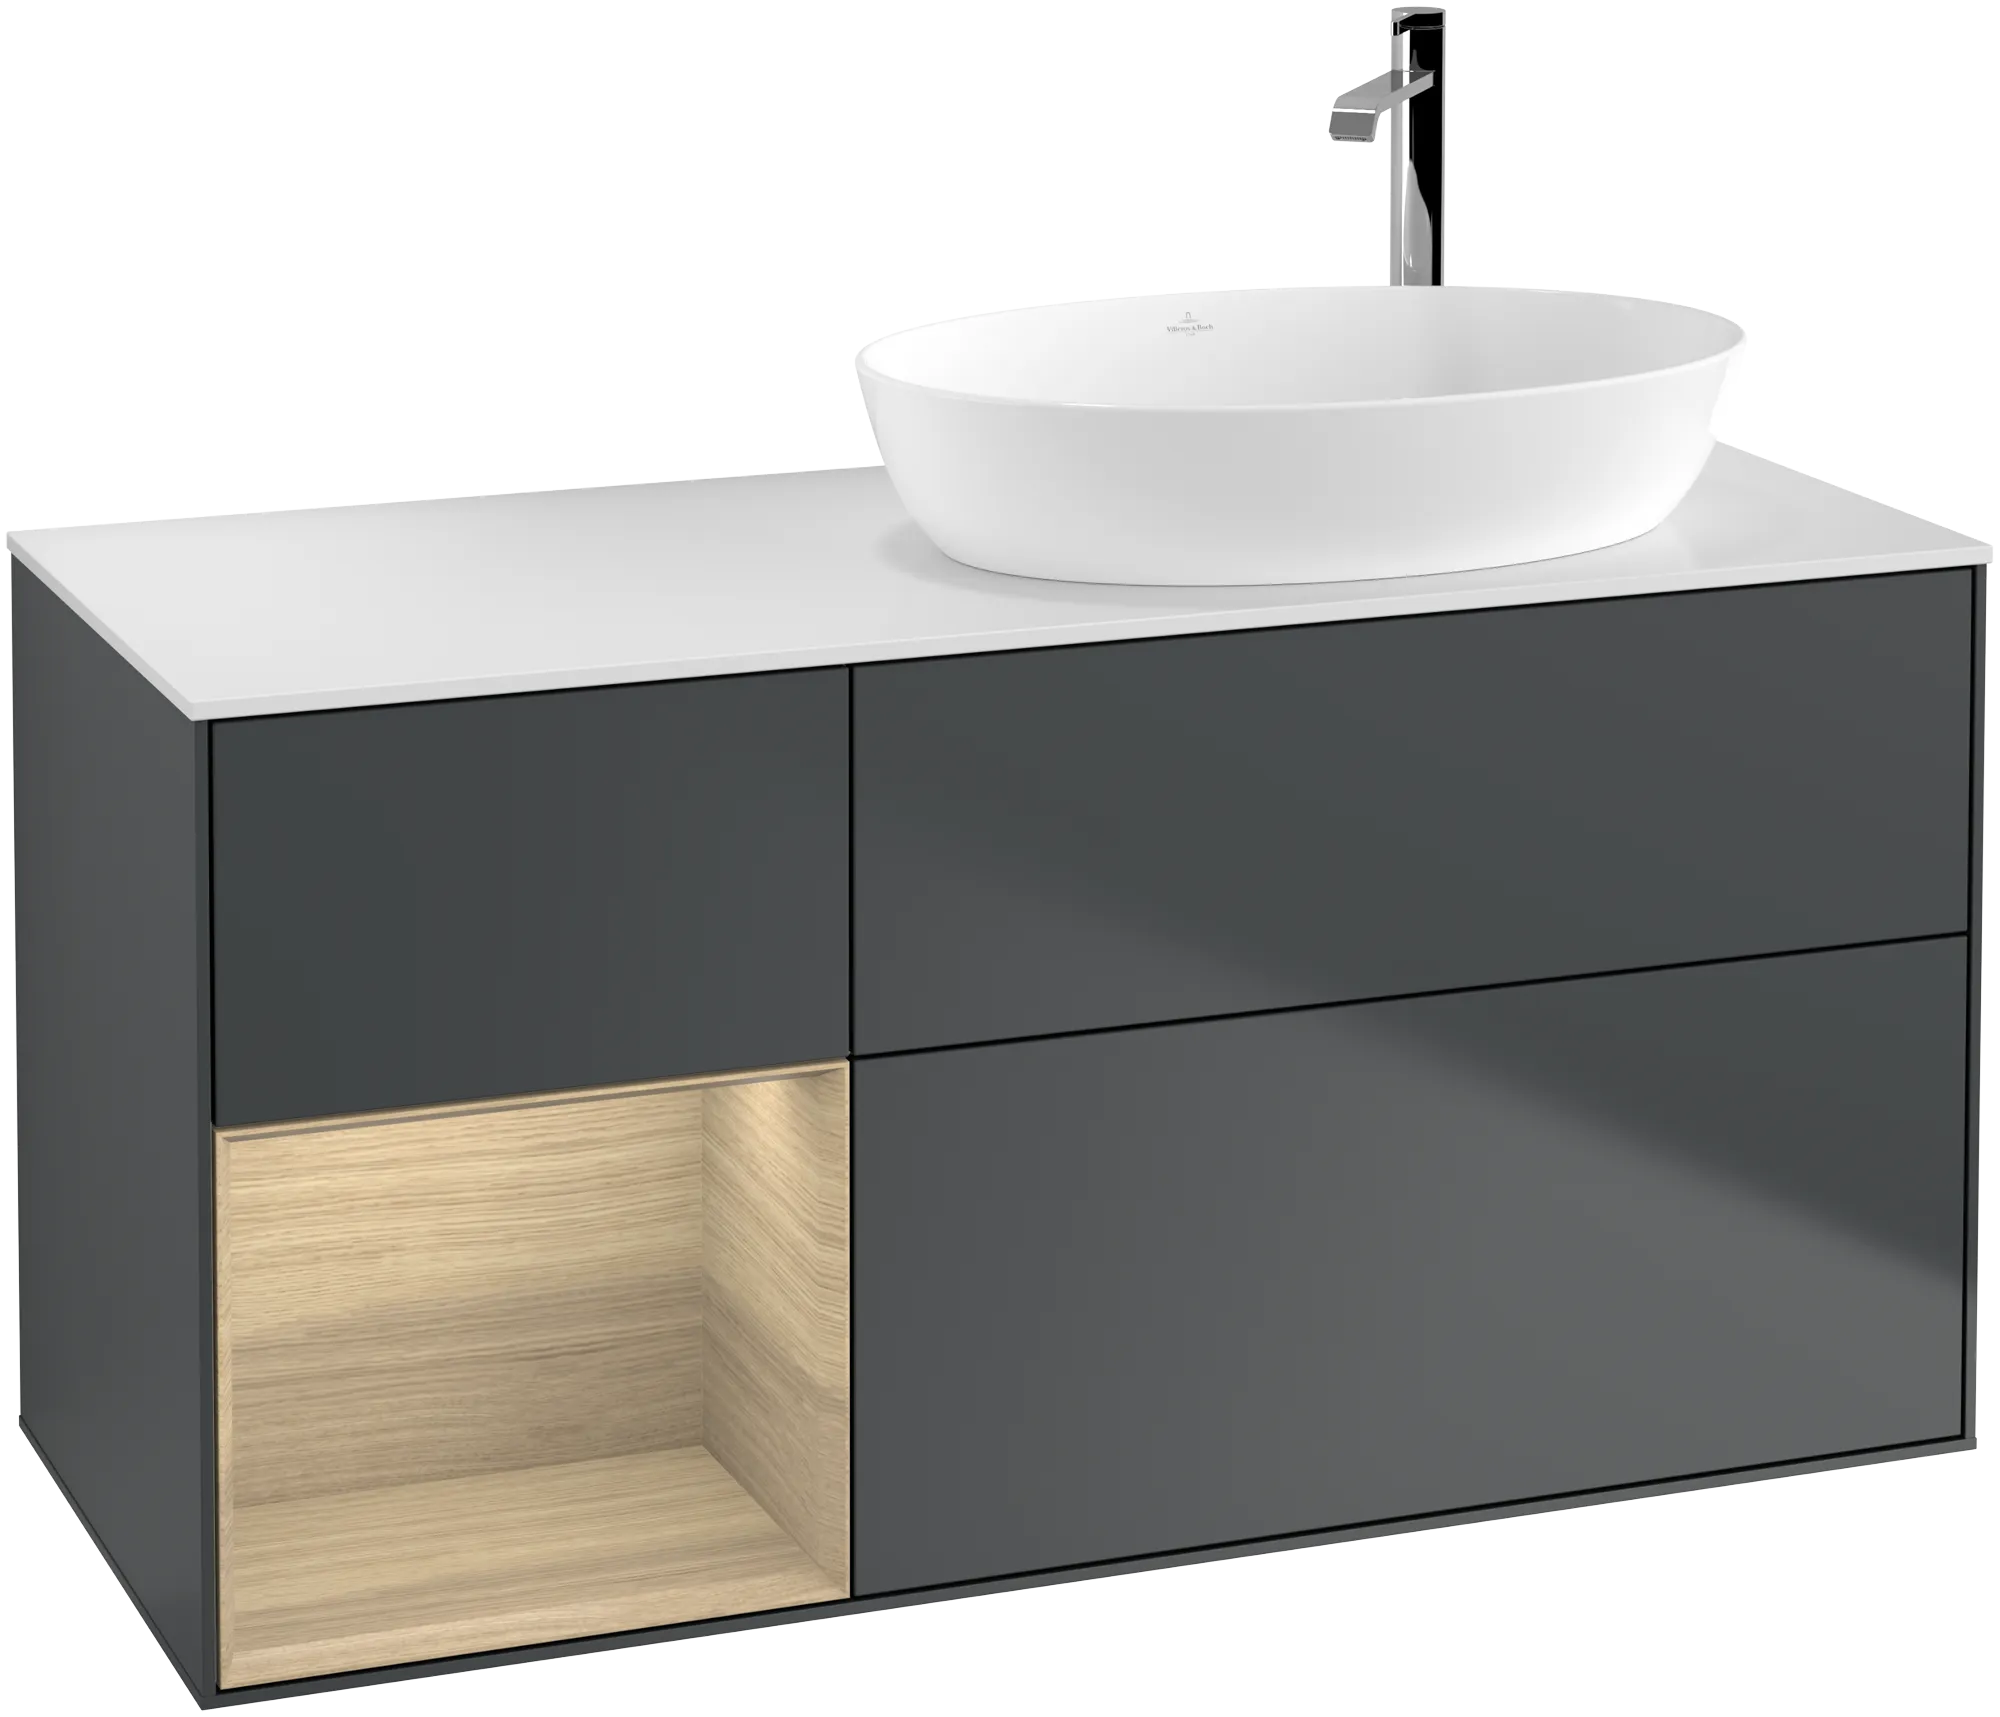 Picture of VILLEROY BOCH Finion Vanity unit, with lighting, 3 pull-out compartments, 1200 x 603 x 501 mm, Midnight Blue Matt Lacquer / Oak Veneer / Glass White Matt #G921PCHG